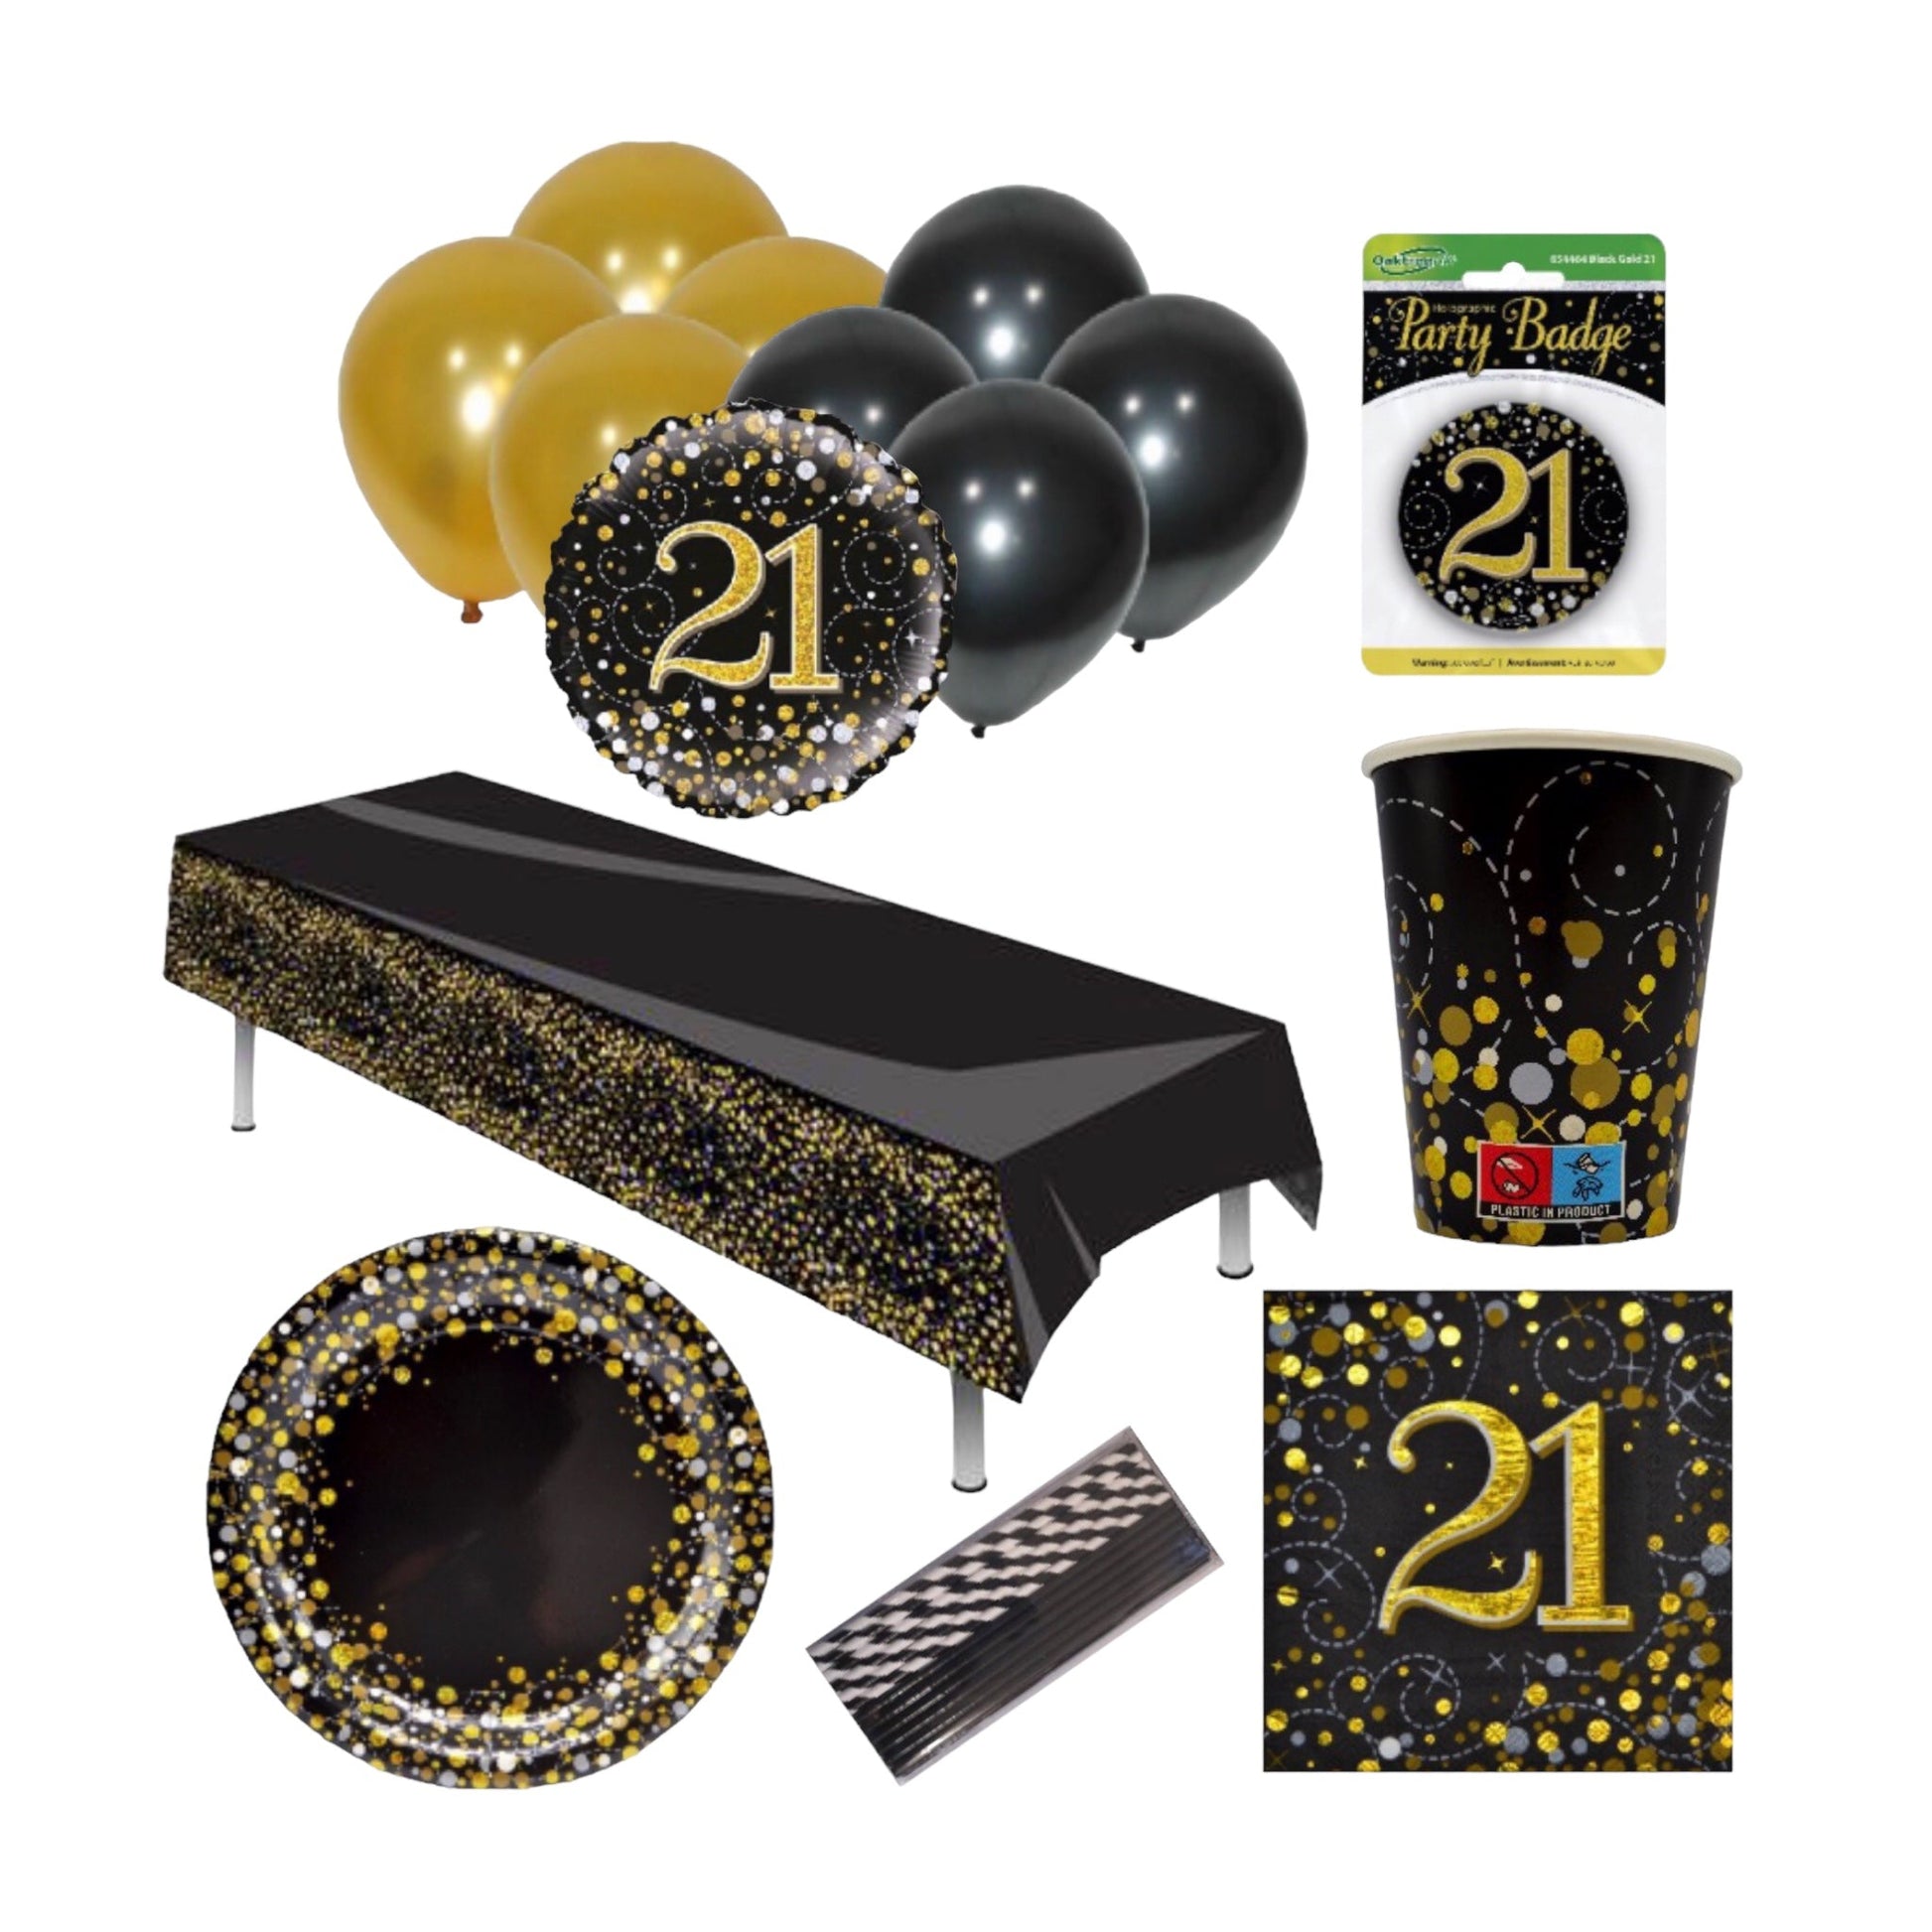 Party with 21st Party -inspired V&N Goodies Galore Party Pack V&N Goodies Galore